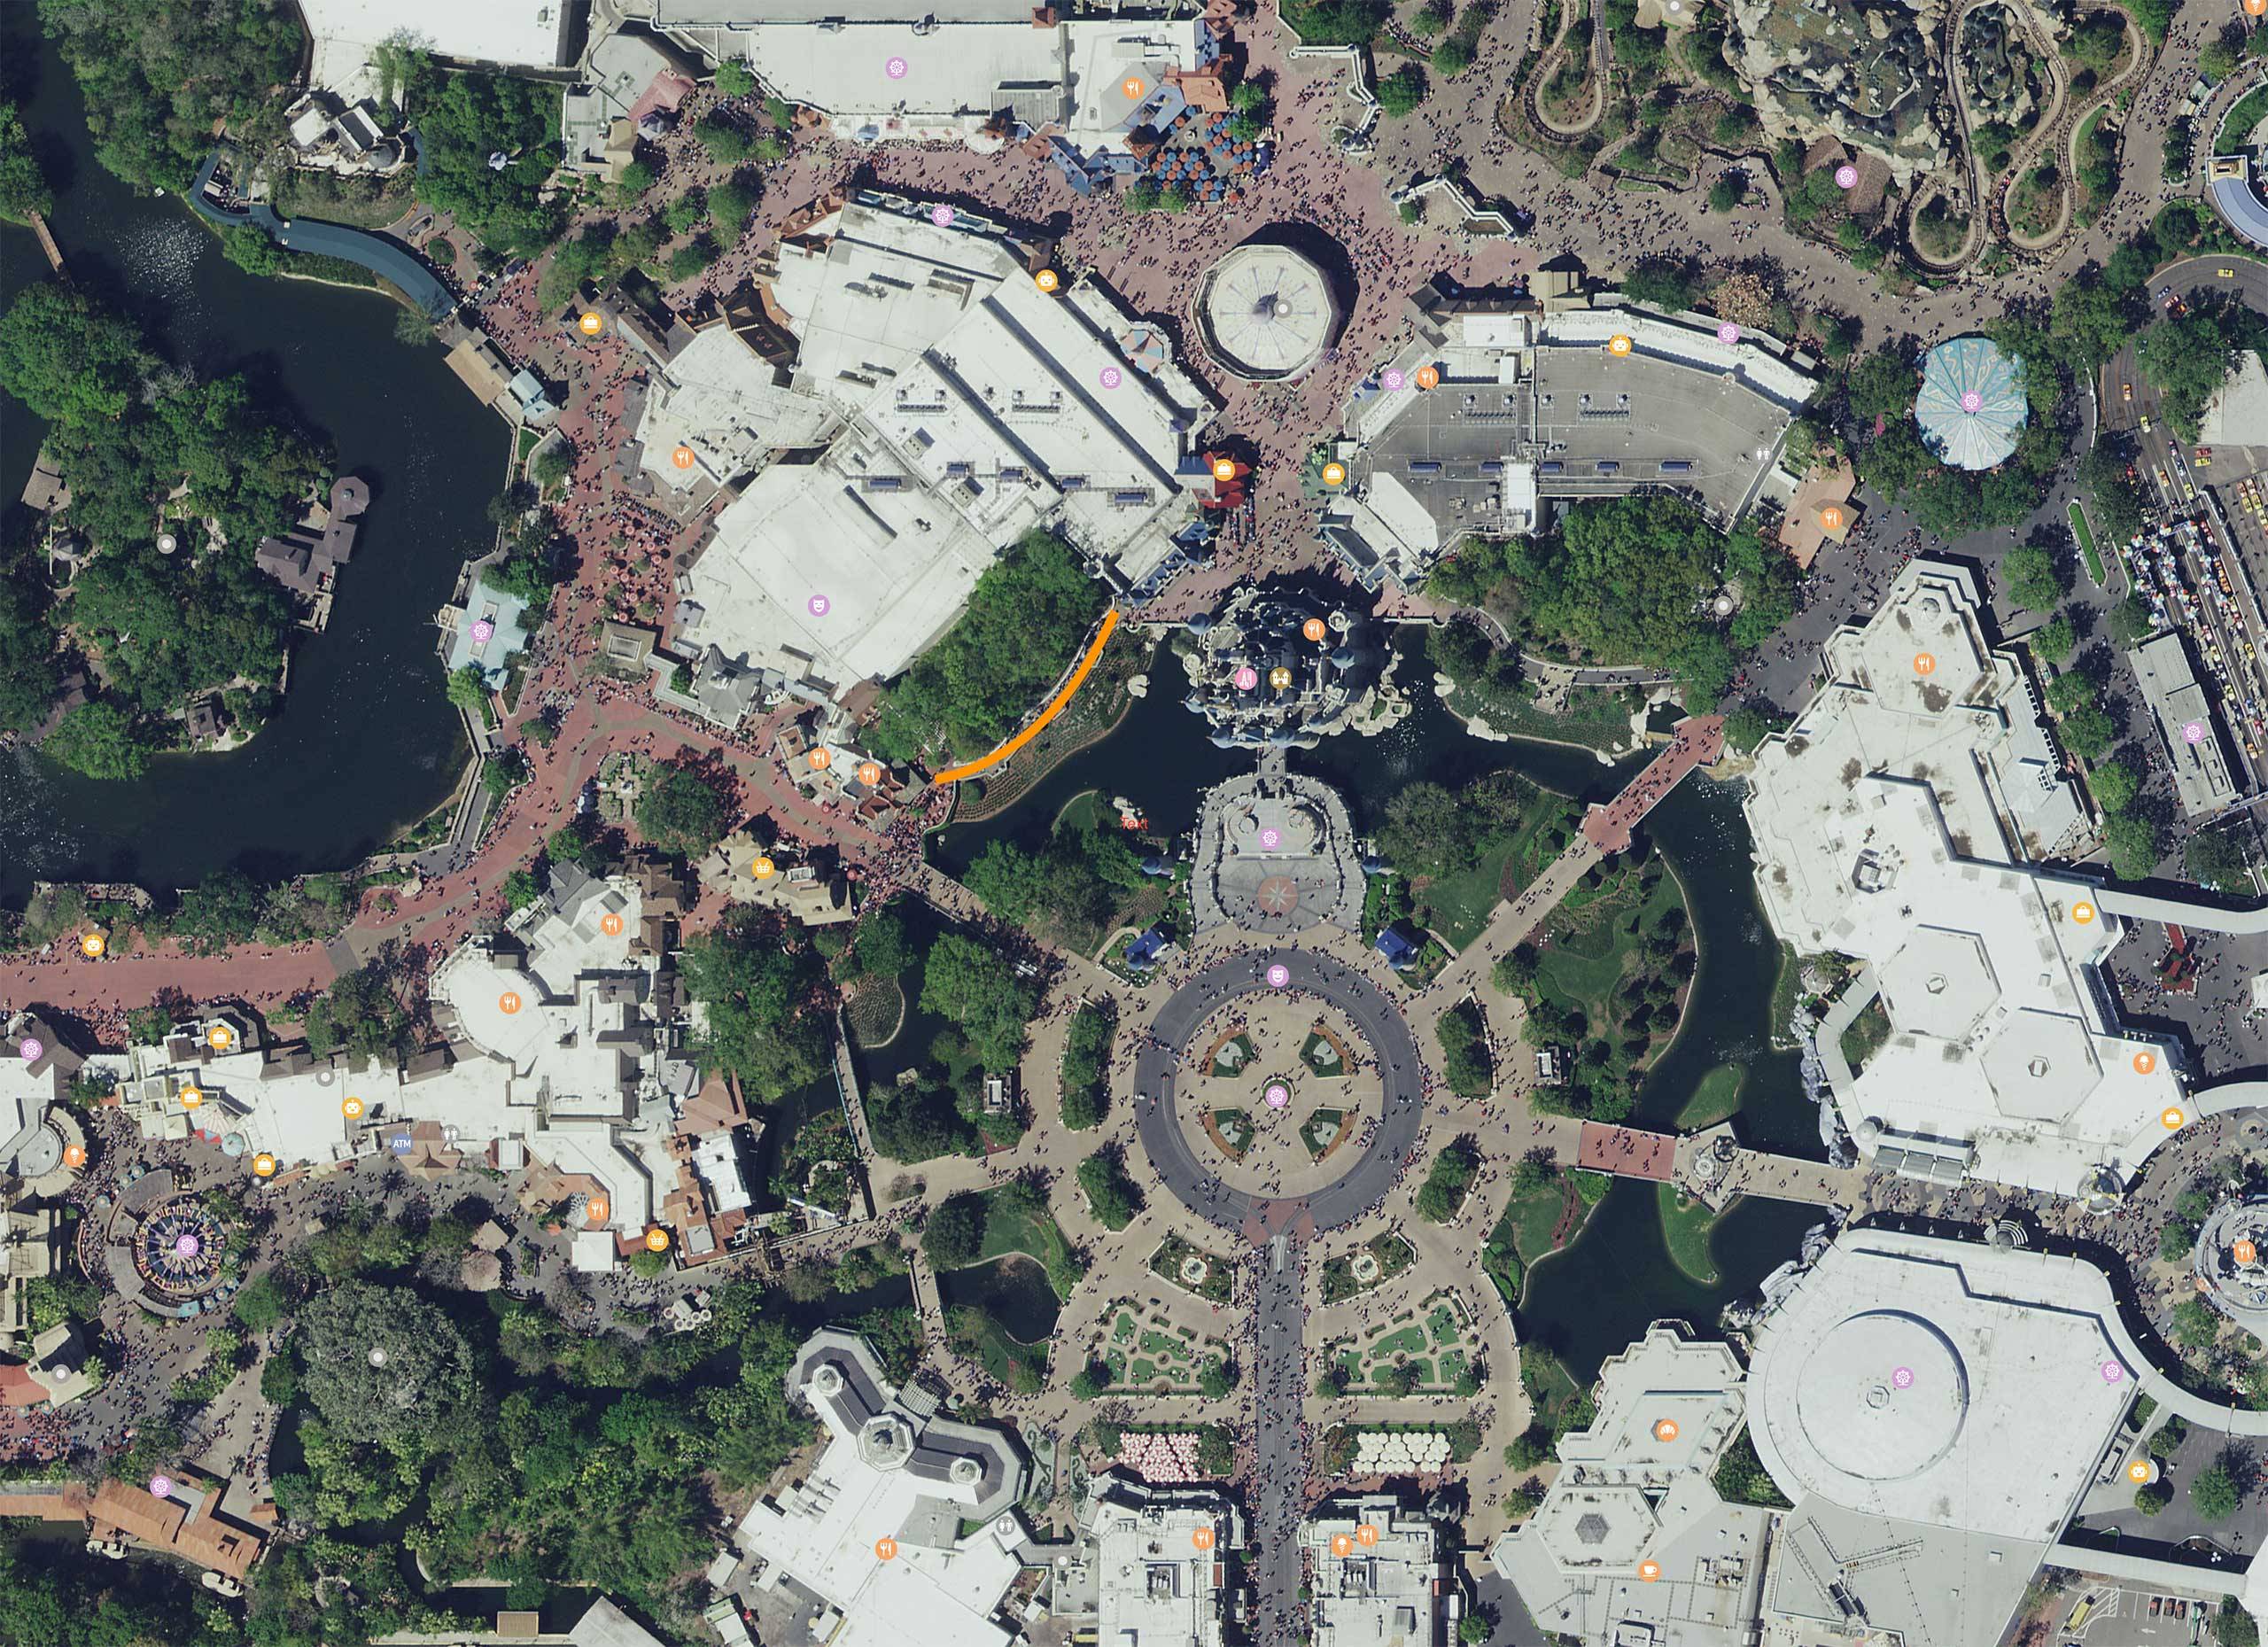 Liberty Square to Fantasyland walkway to be widened behind Cinderella Castle